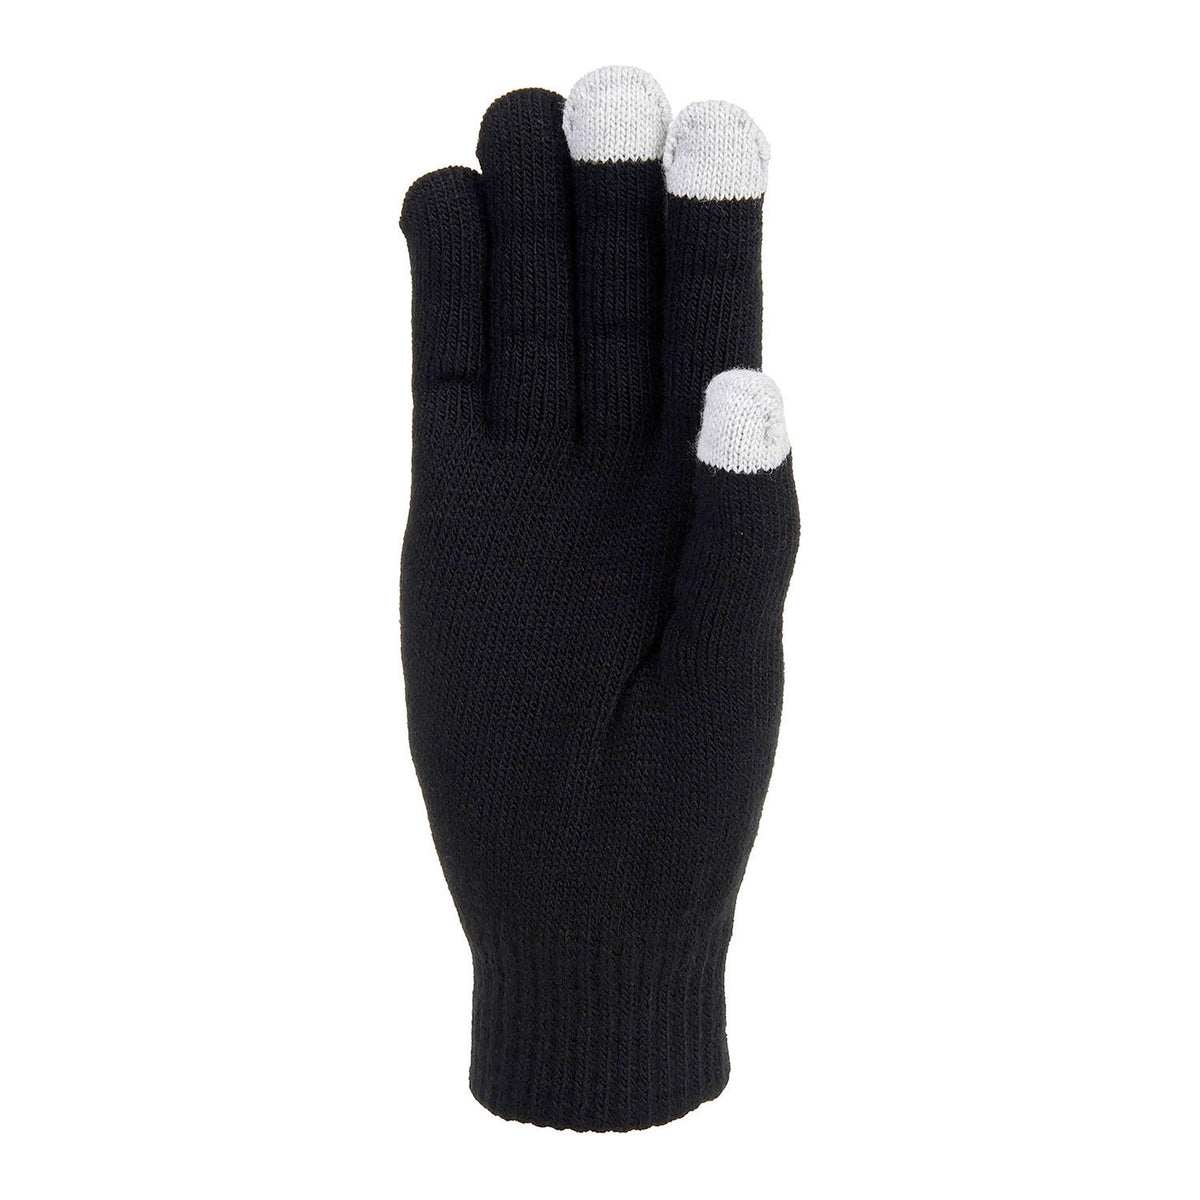 Extremities Thinny Touch Glove - Black - One Size